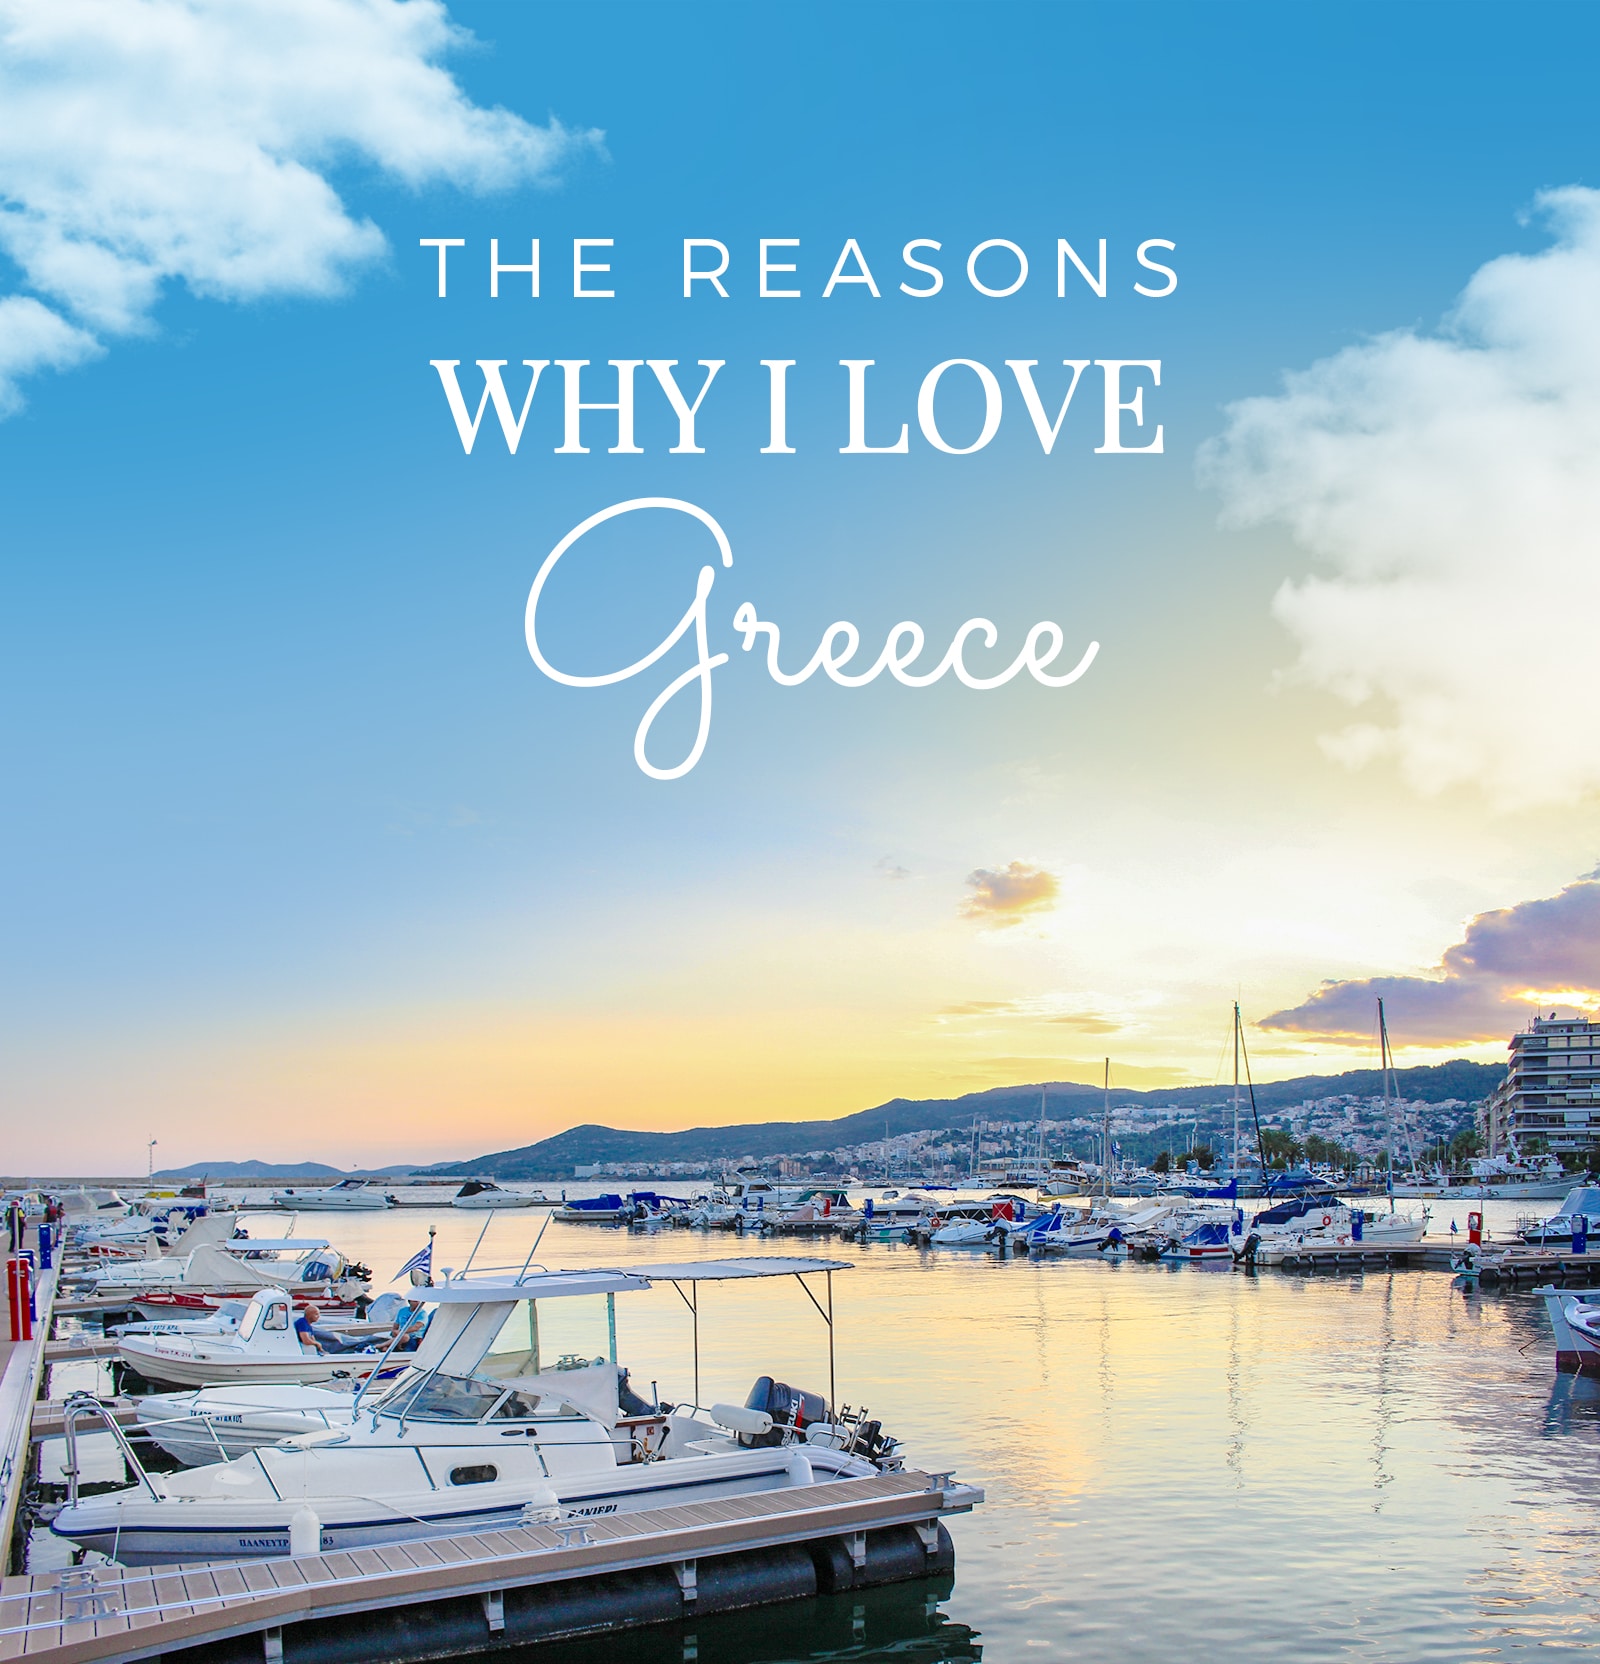 The reasons why I love Greece